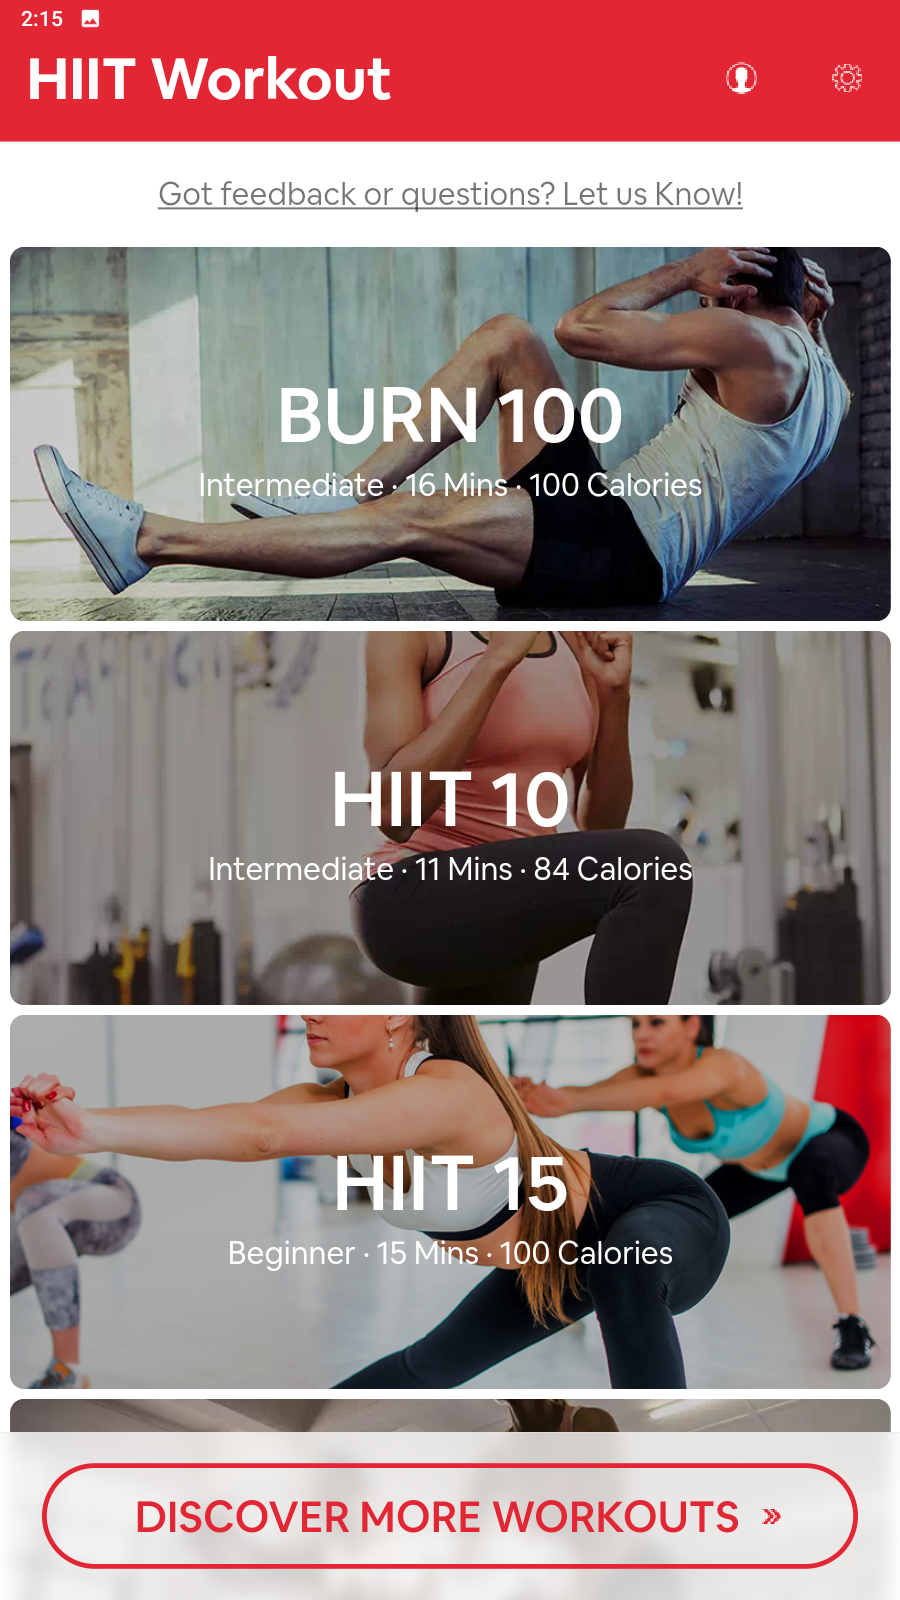 Dashboard in HIIT Workouts app